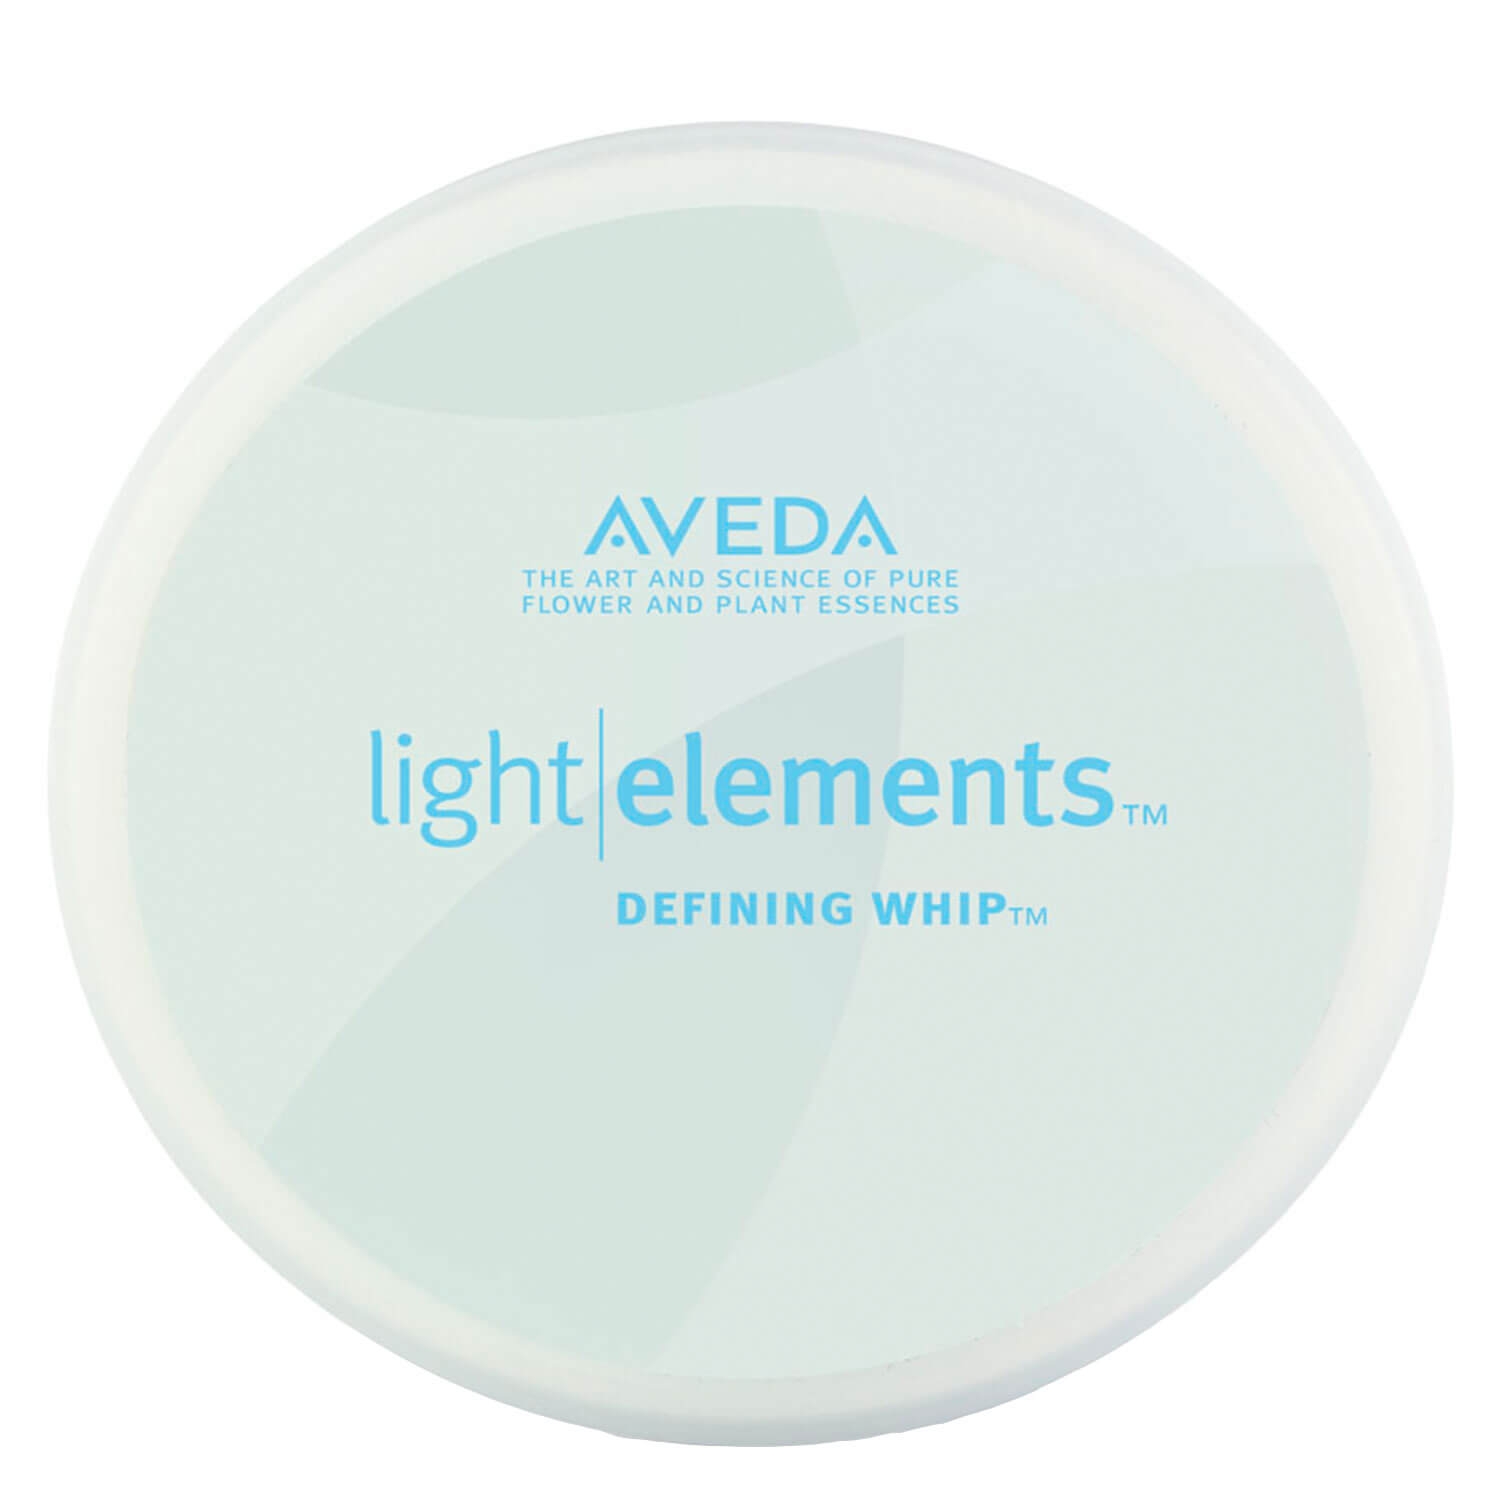 Product image from light elements - defining whip